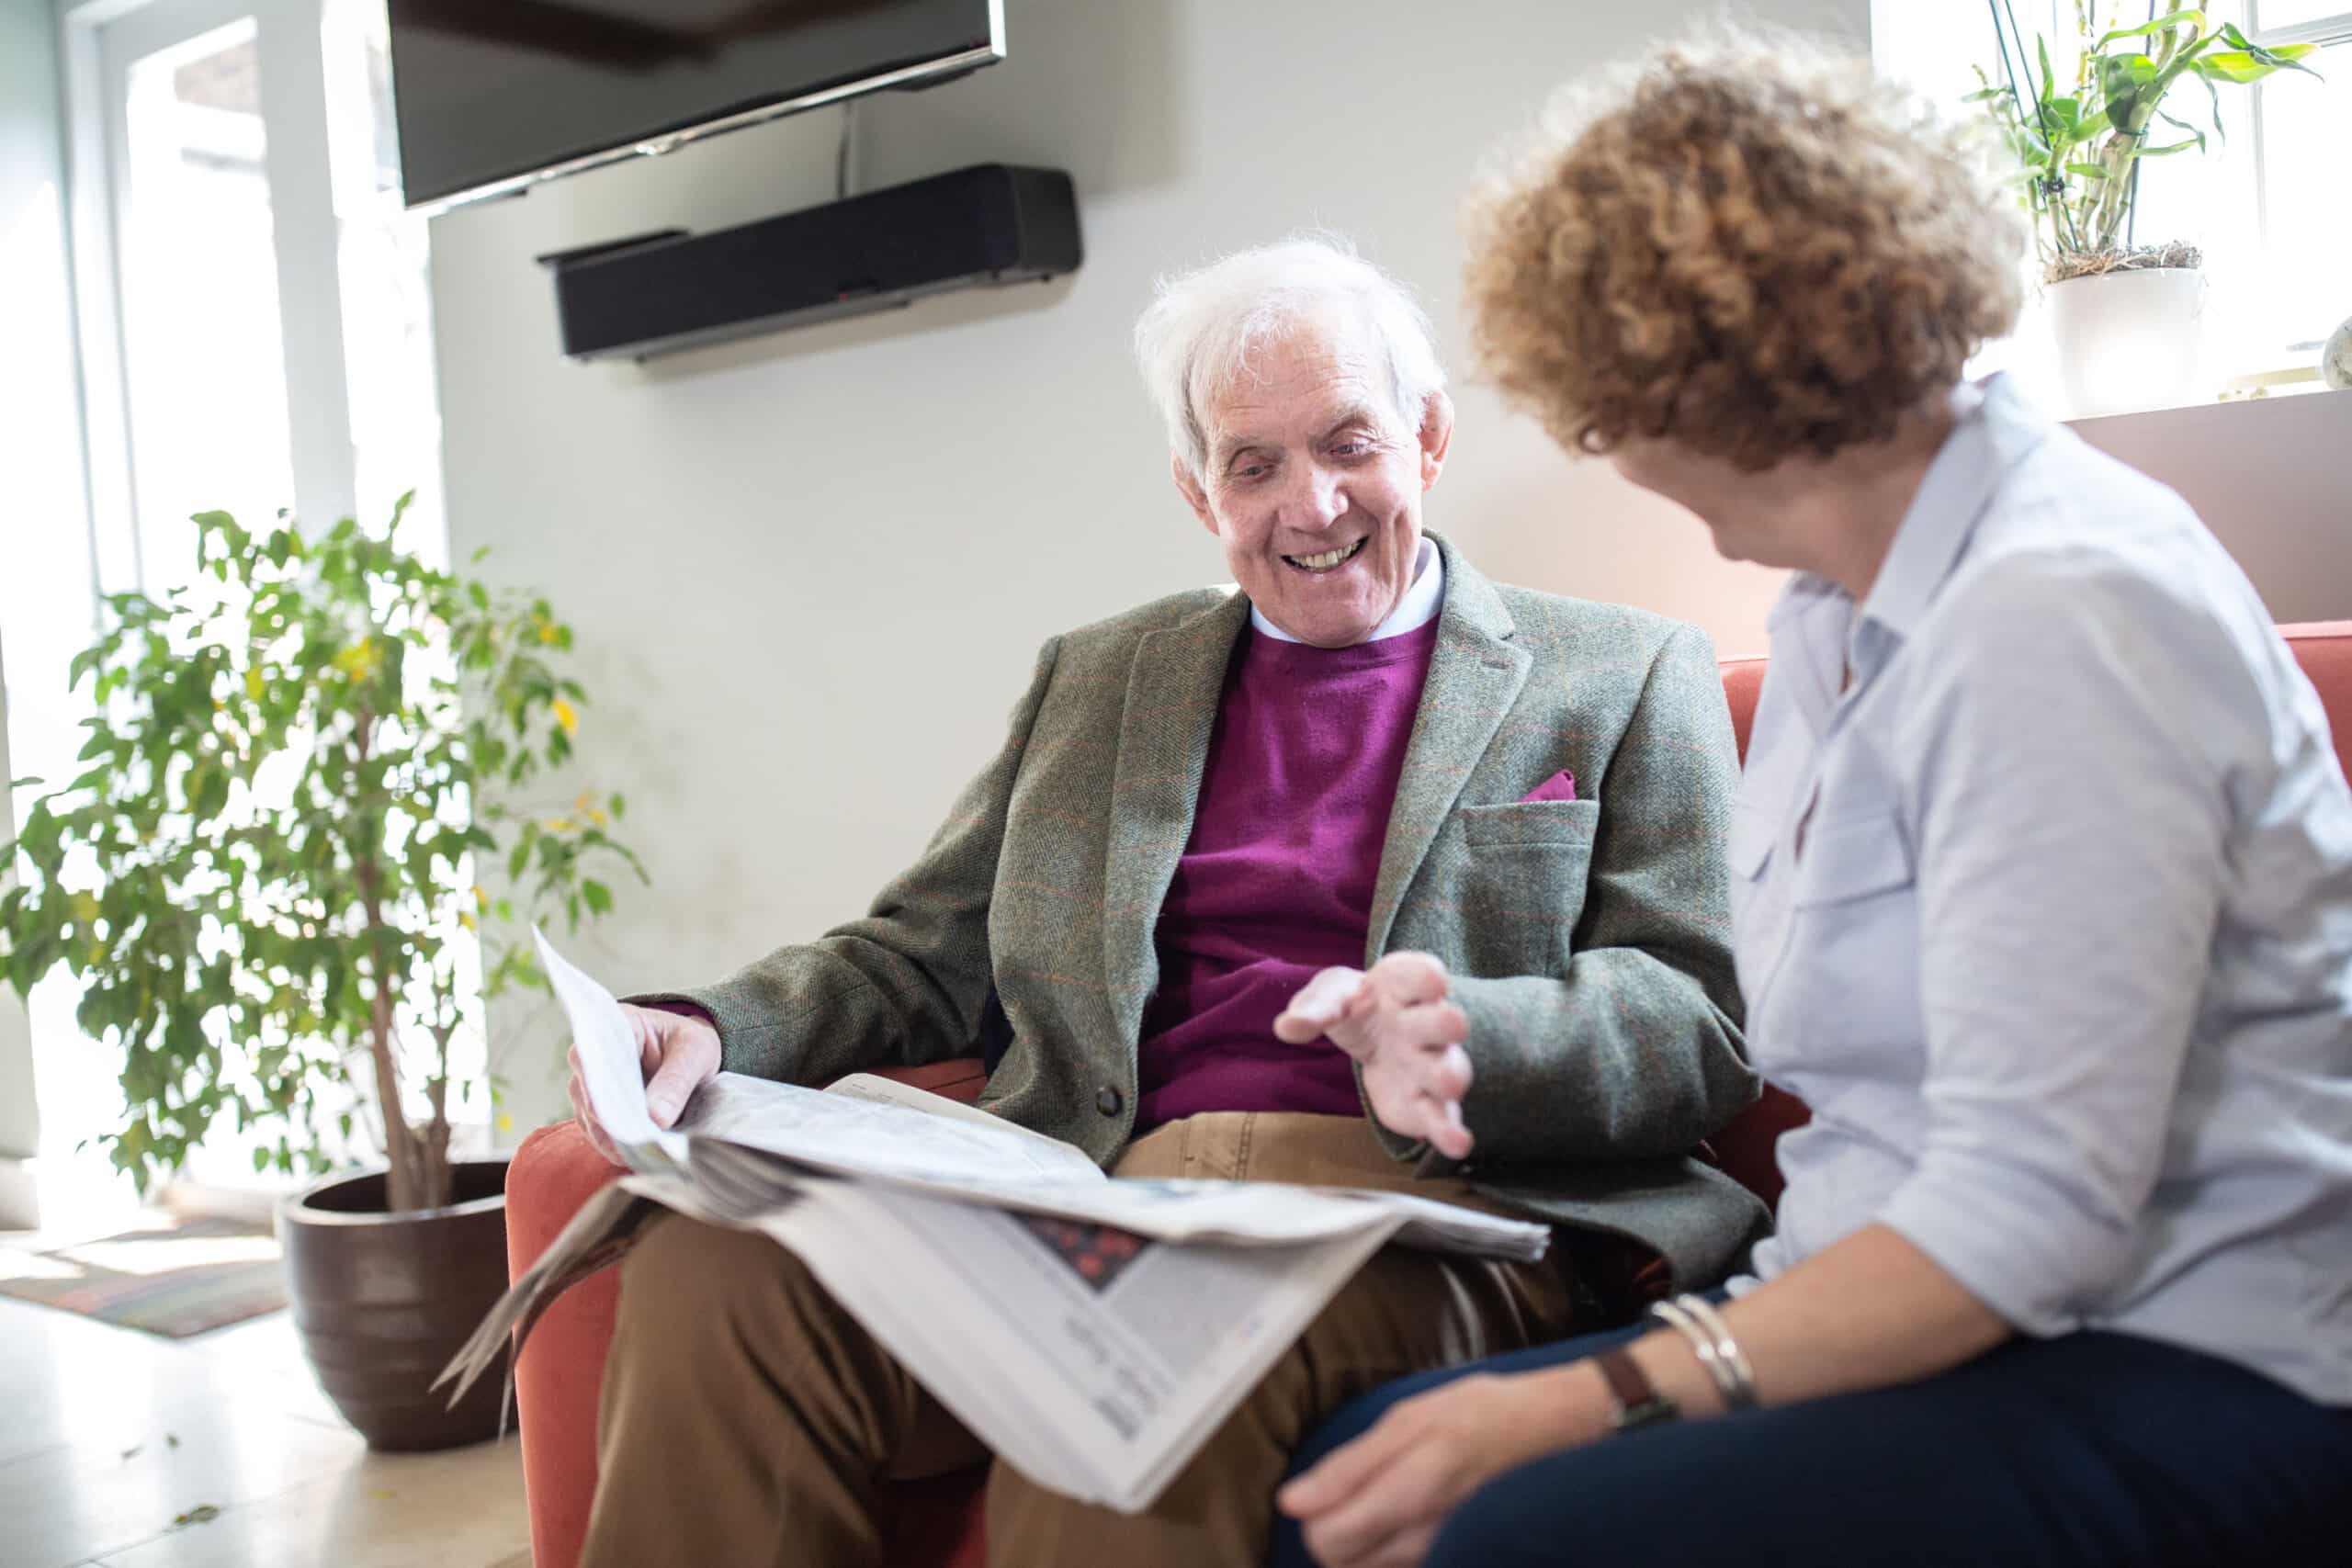 Activities for the Elderly in Oxfordshire